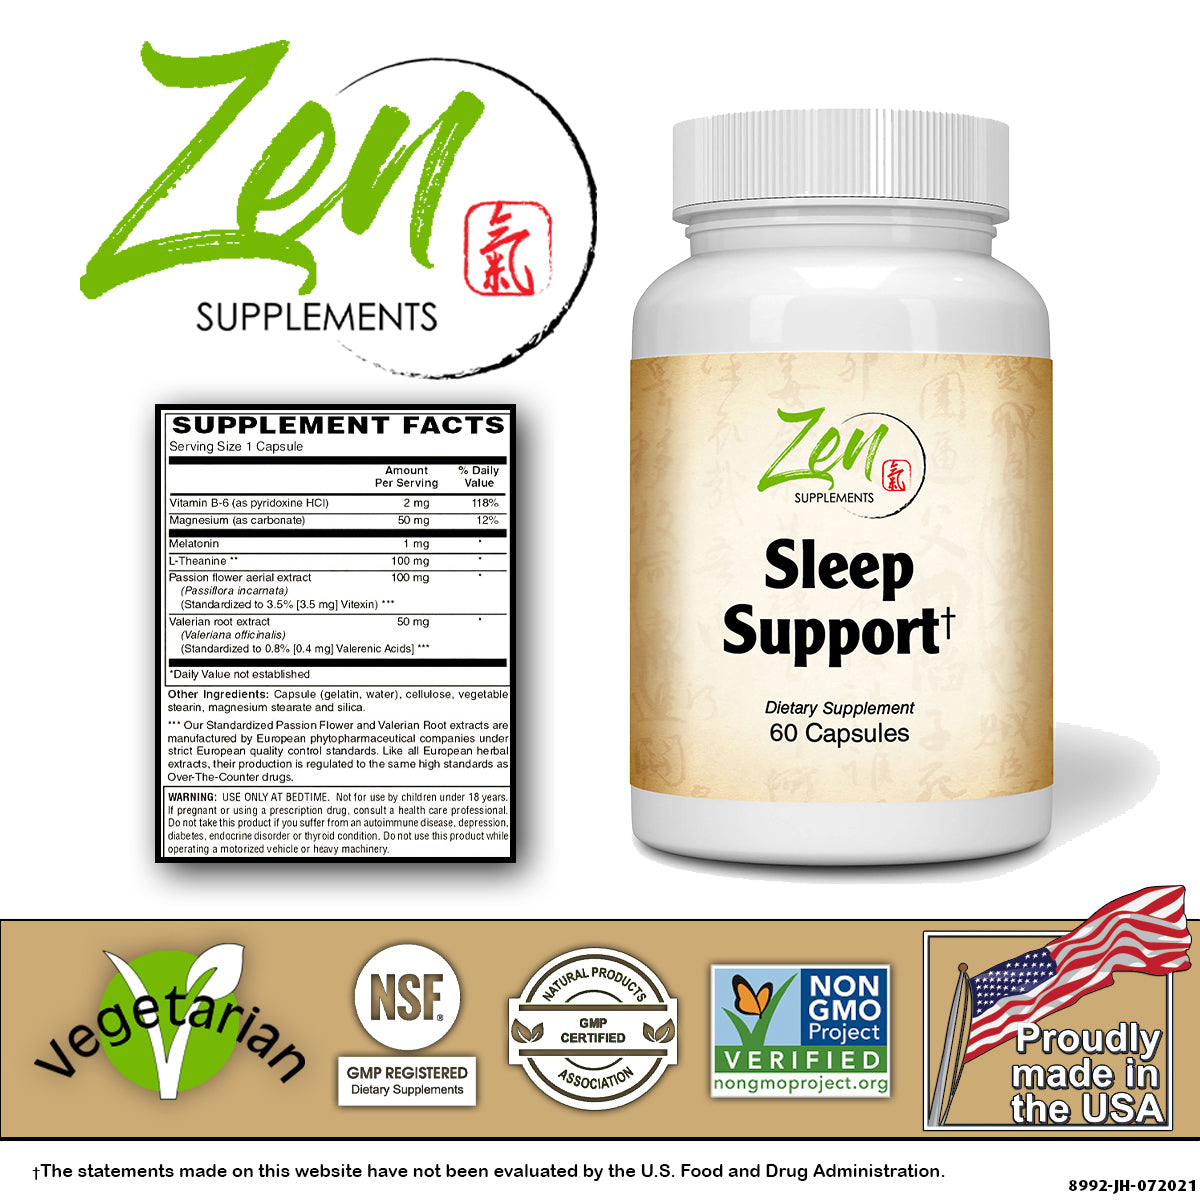 Zen Supplements - Sleep Support with Melatonin, L-Theanine, Passionflower & Valerian 60-Caps - Supports Overall Sleep Quality - Magnesium to Fall Asleep Fast, Calm & Restful Night, Non Habit Forming